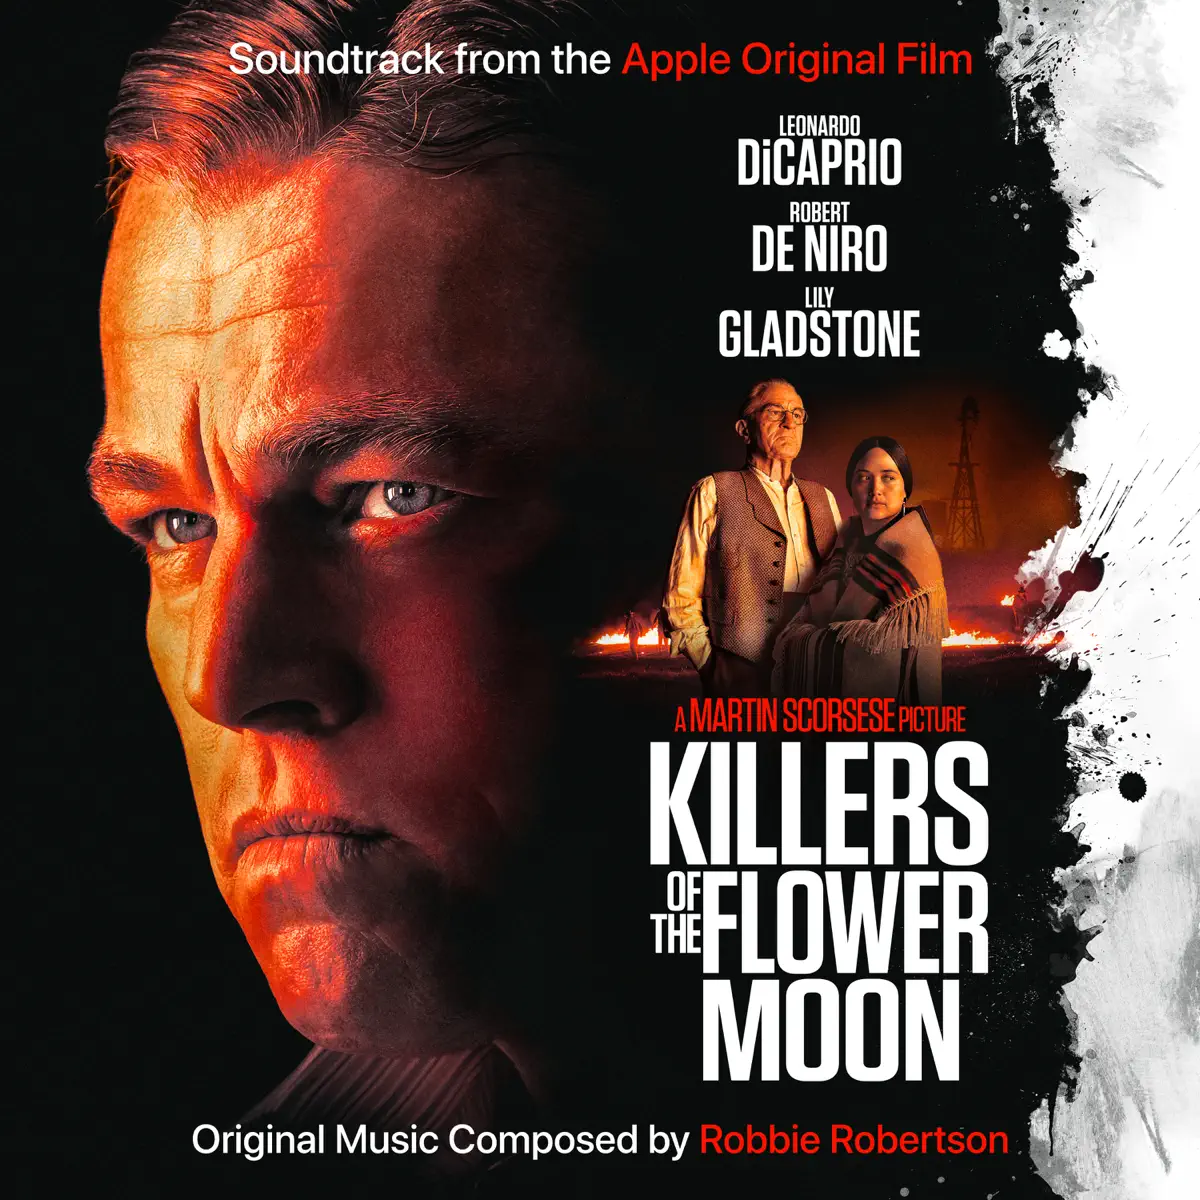 Robbie Robertson - 花月杀手 Killers of the Flower Moon (Soundtrack from the Apple Original Film) (2023) [iTunes Plus AAC M4A]-新房子